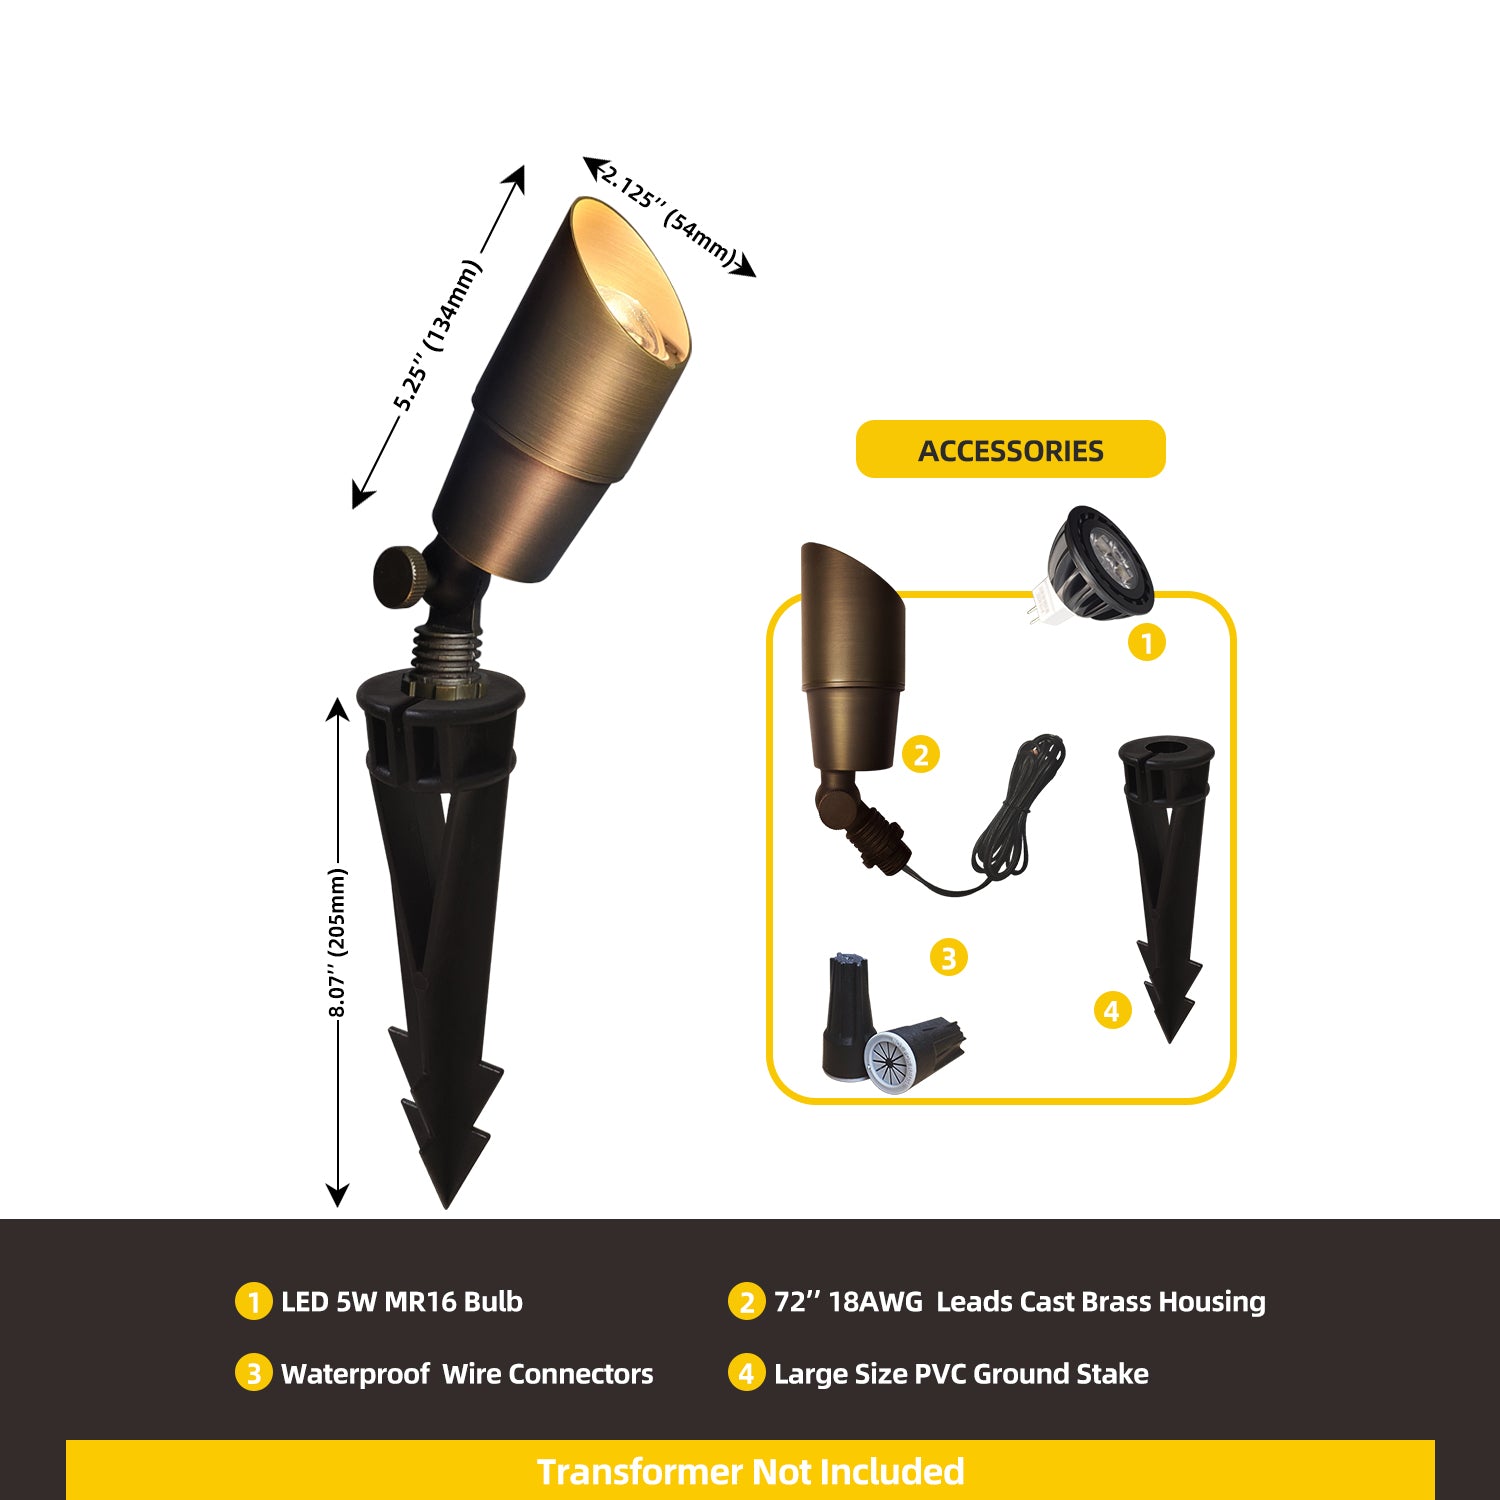 COLOER low voltage LED brass landscape spotlight COA101B with included LED bulb, waterproof connectors, brass housing, and PVC ground stake. Transformer not included.